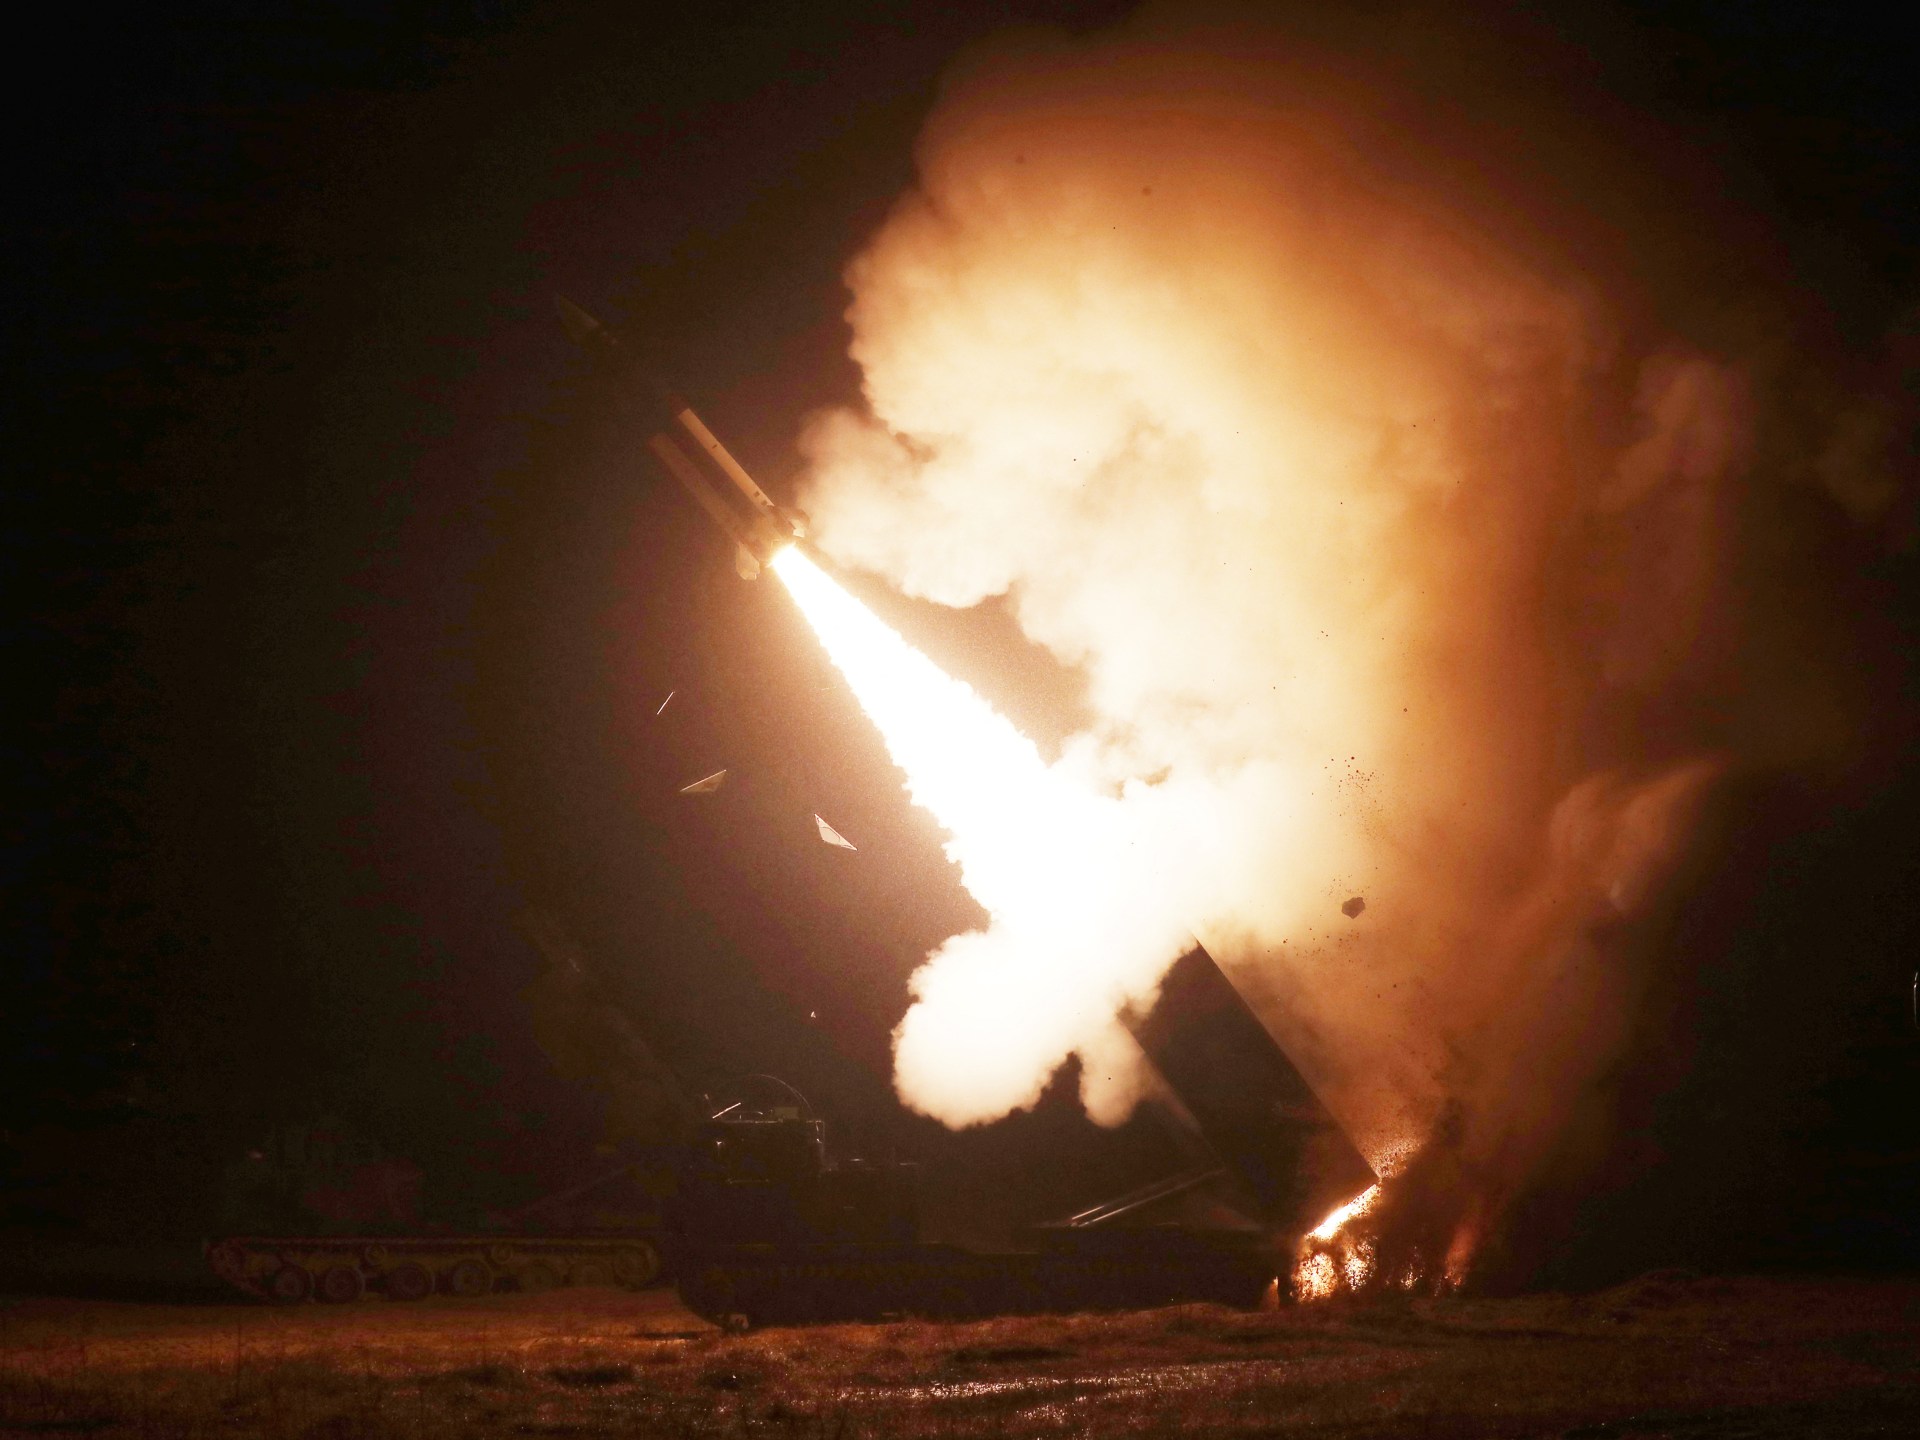 US, S. Korea Fire Missiles After N. Korea Launch